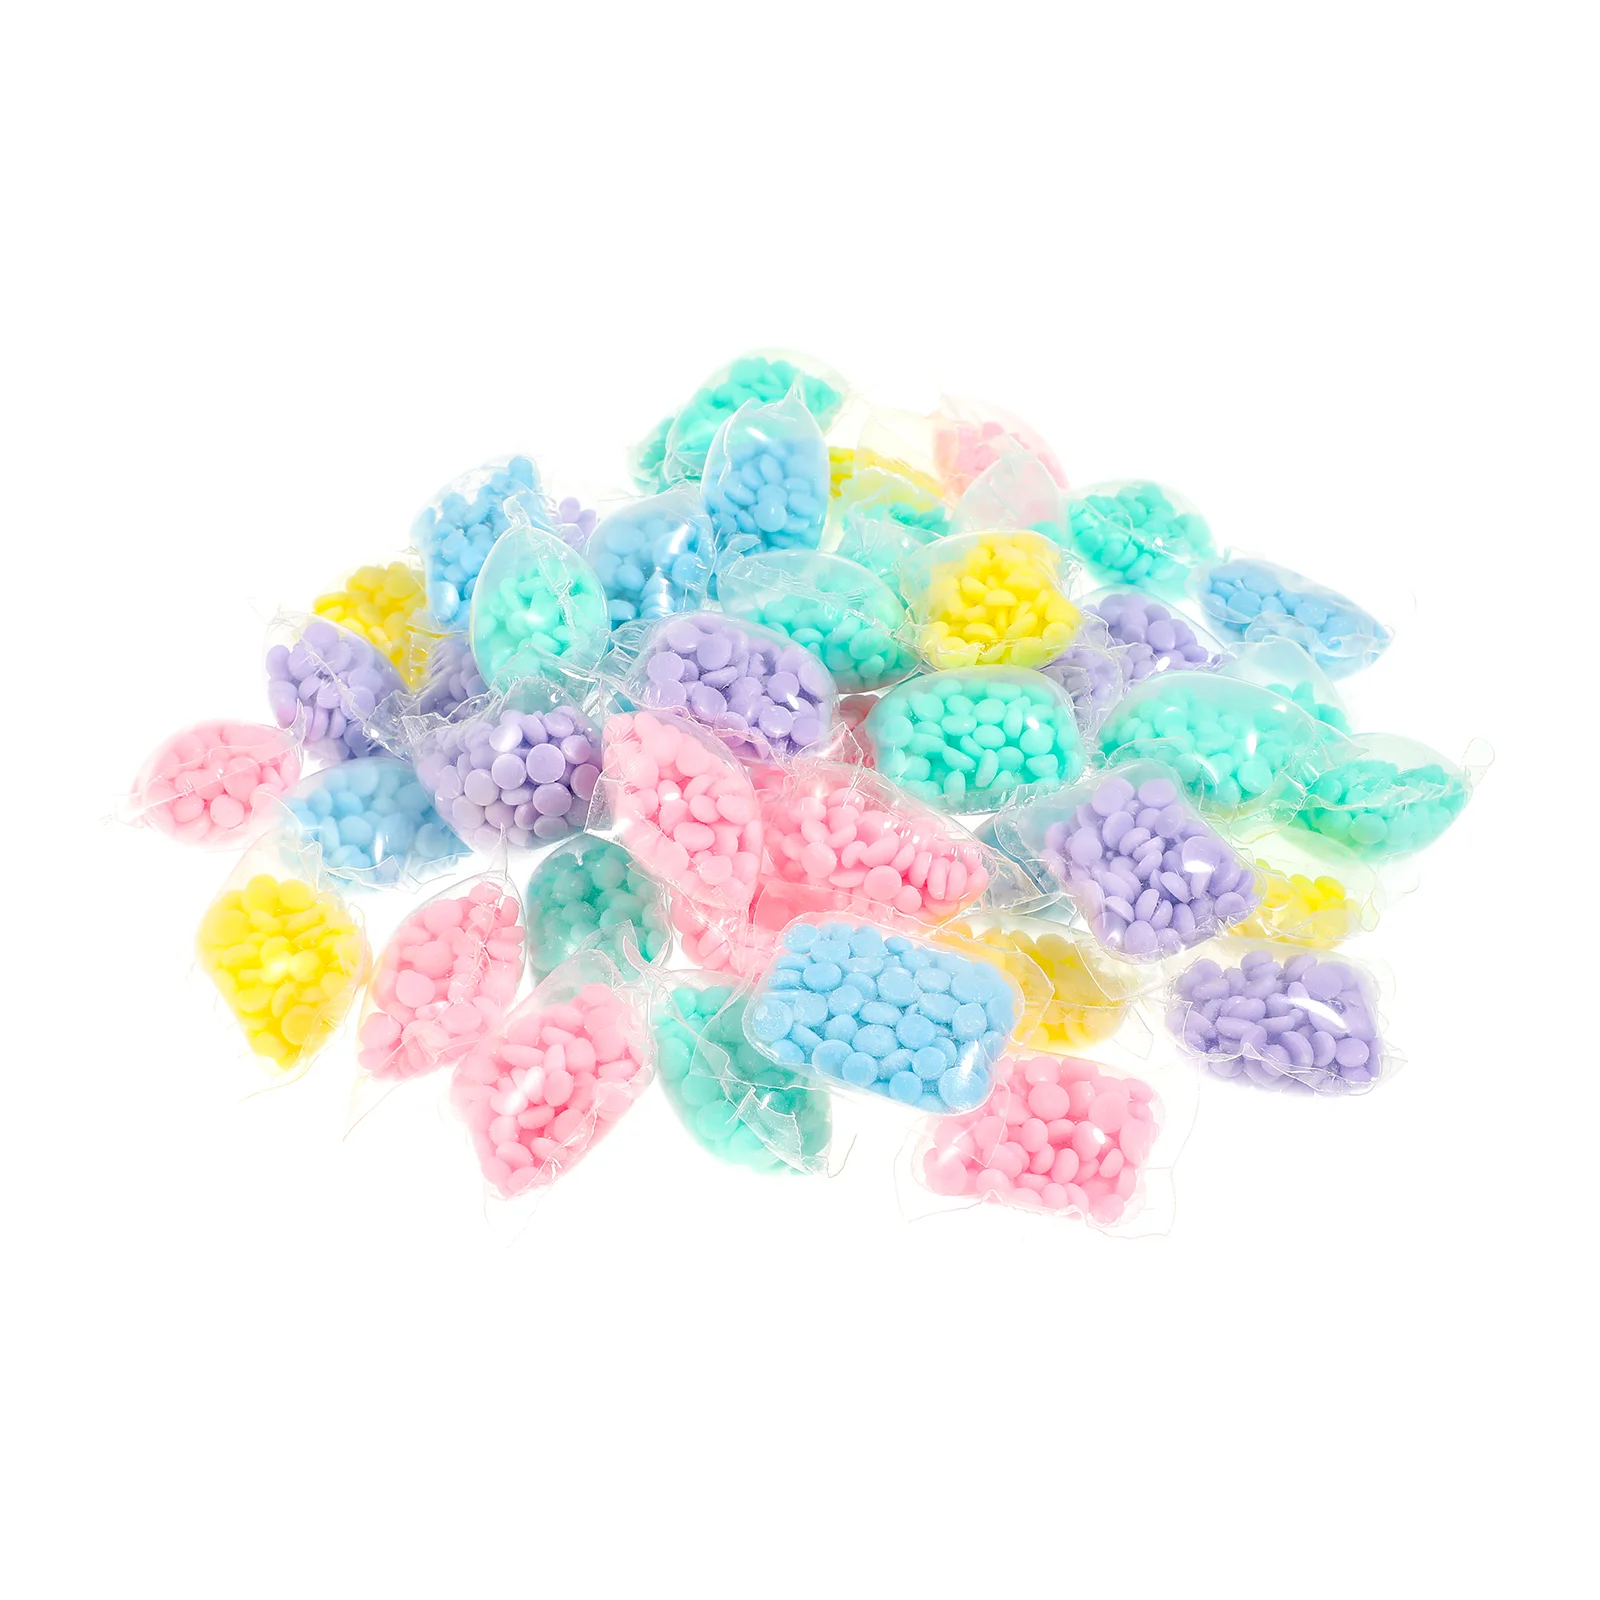 

50 Pcs Fragrance Condensate Beads Scent Boosters Washer Liquid Softener Laundry Baby Washing Machine Fresh